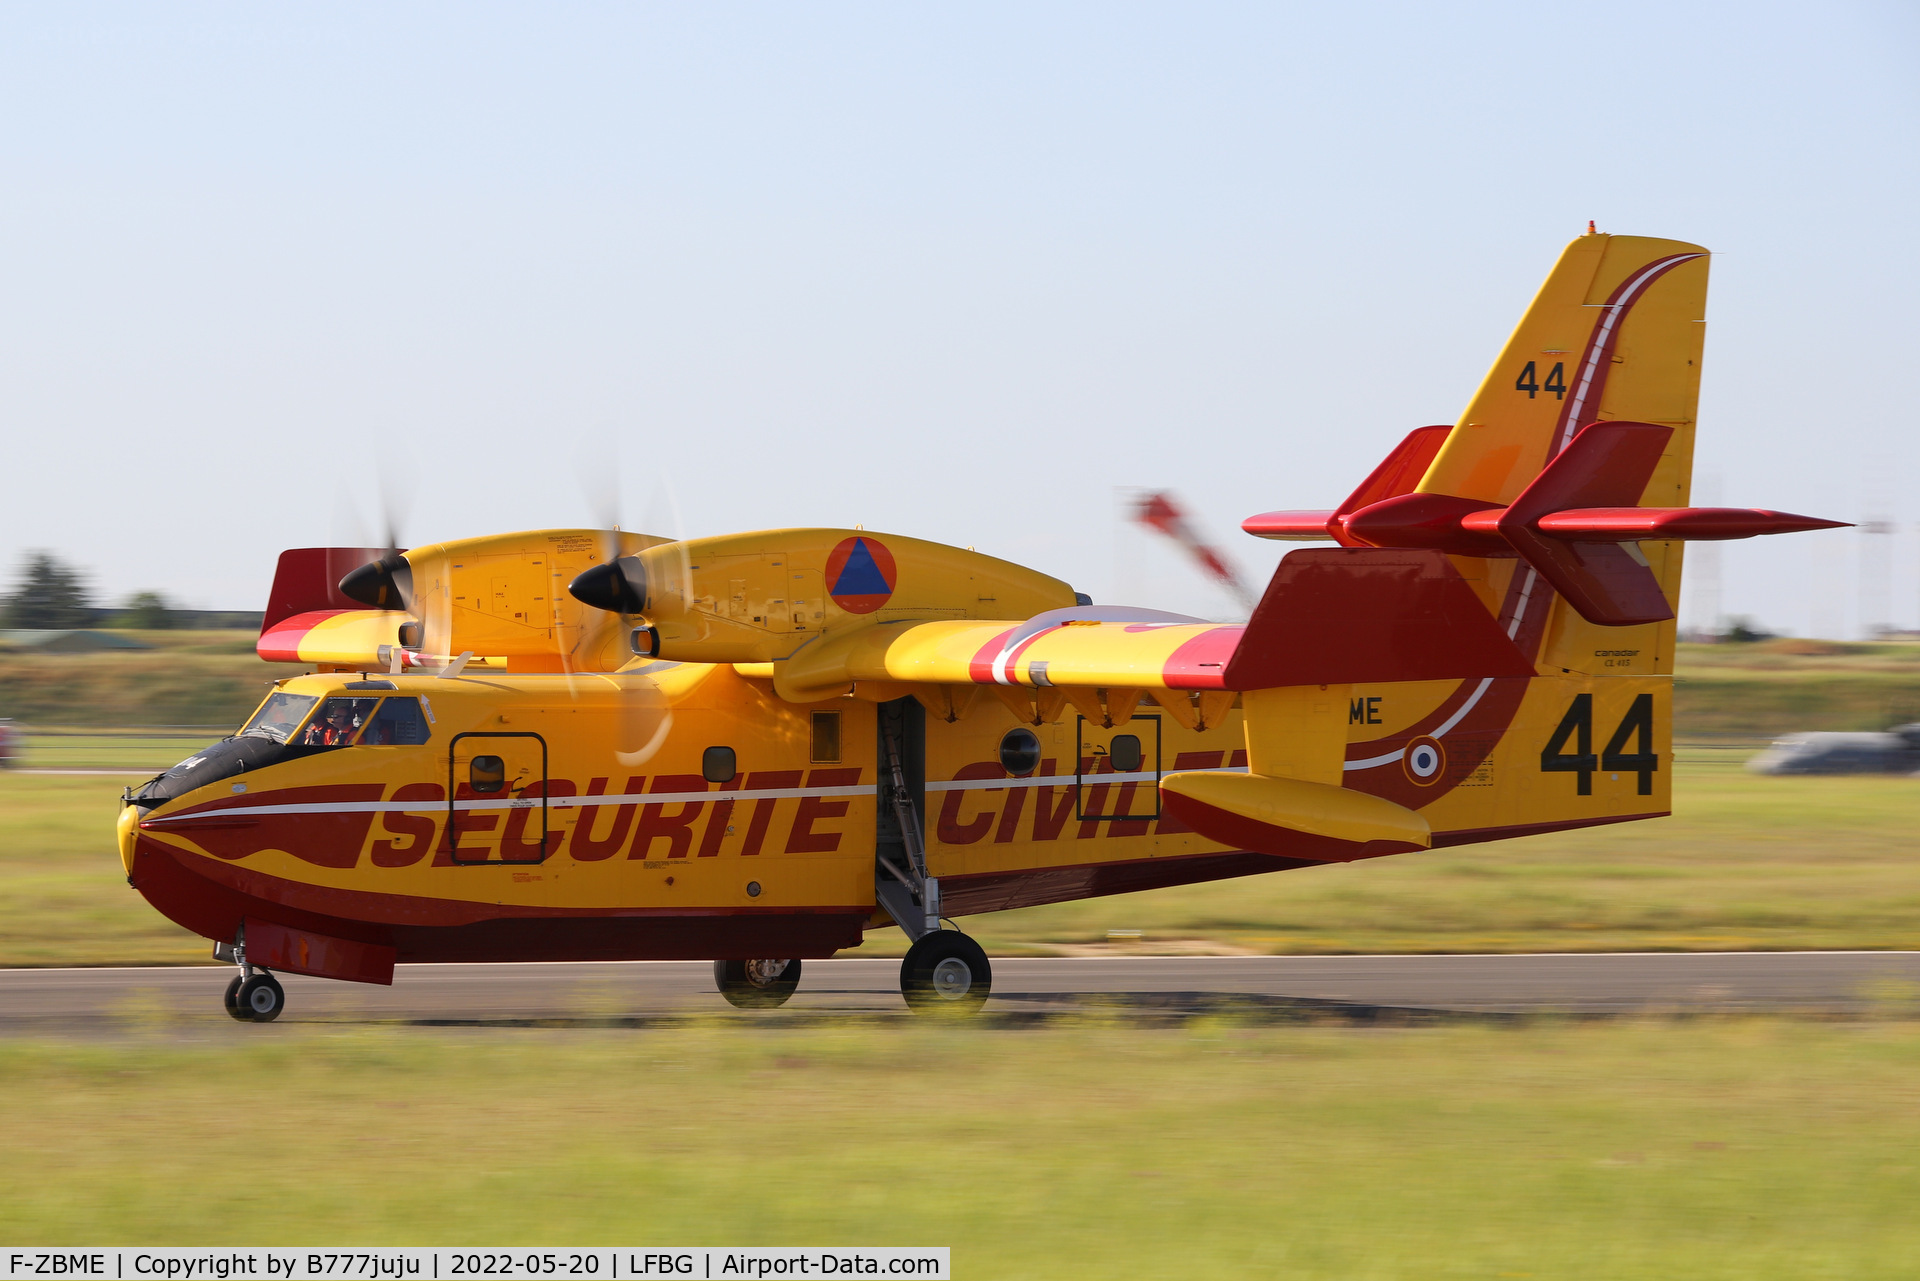 F-ZBME, 2001 Bombardier CL-415 (CL-215-6B11) C/N 2057, during Cognac airshow 2022